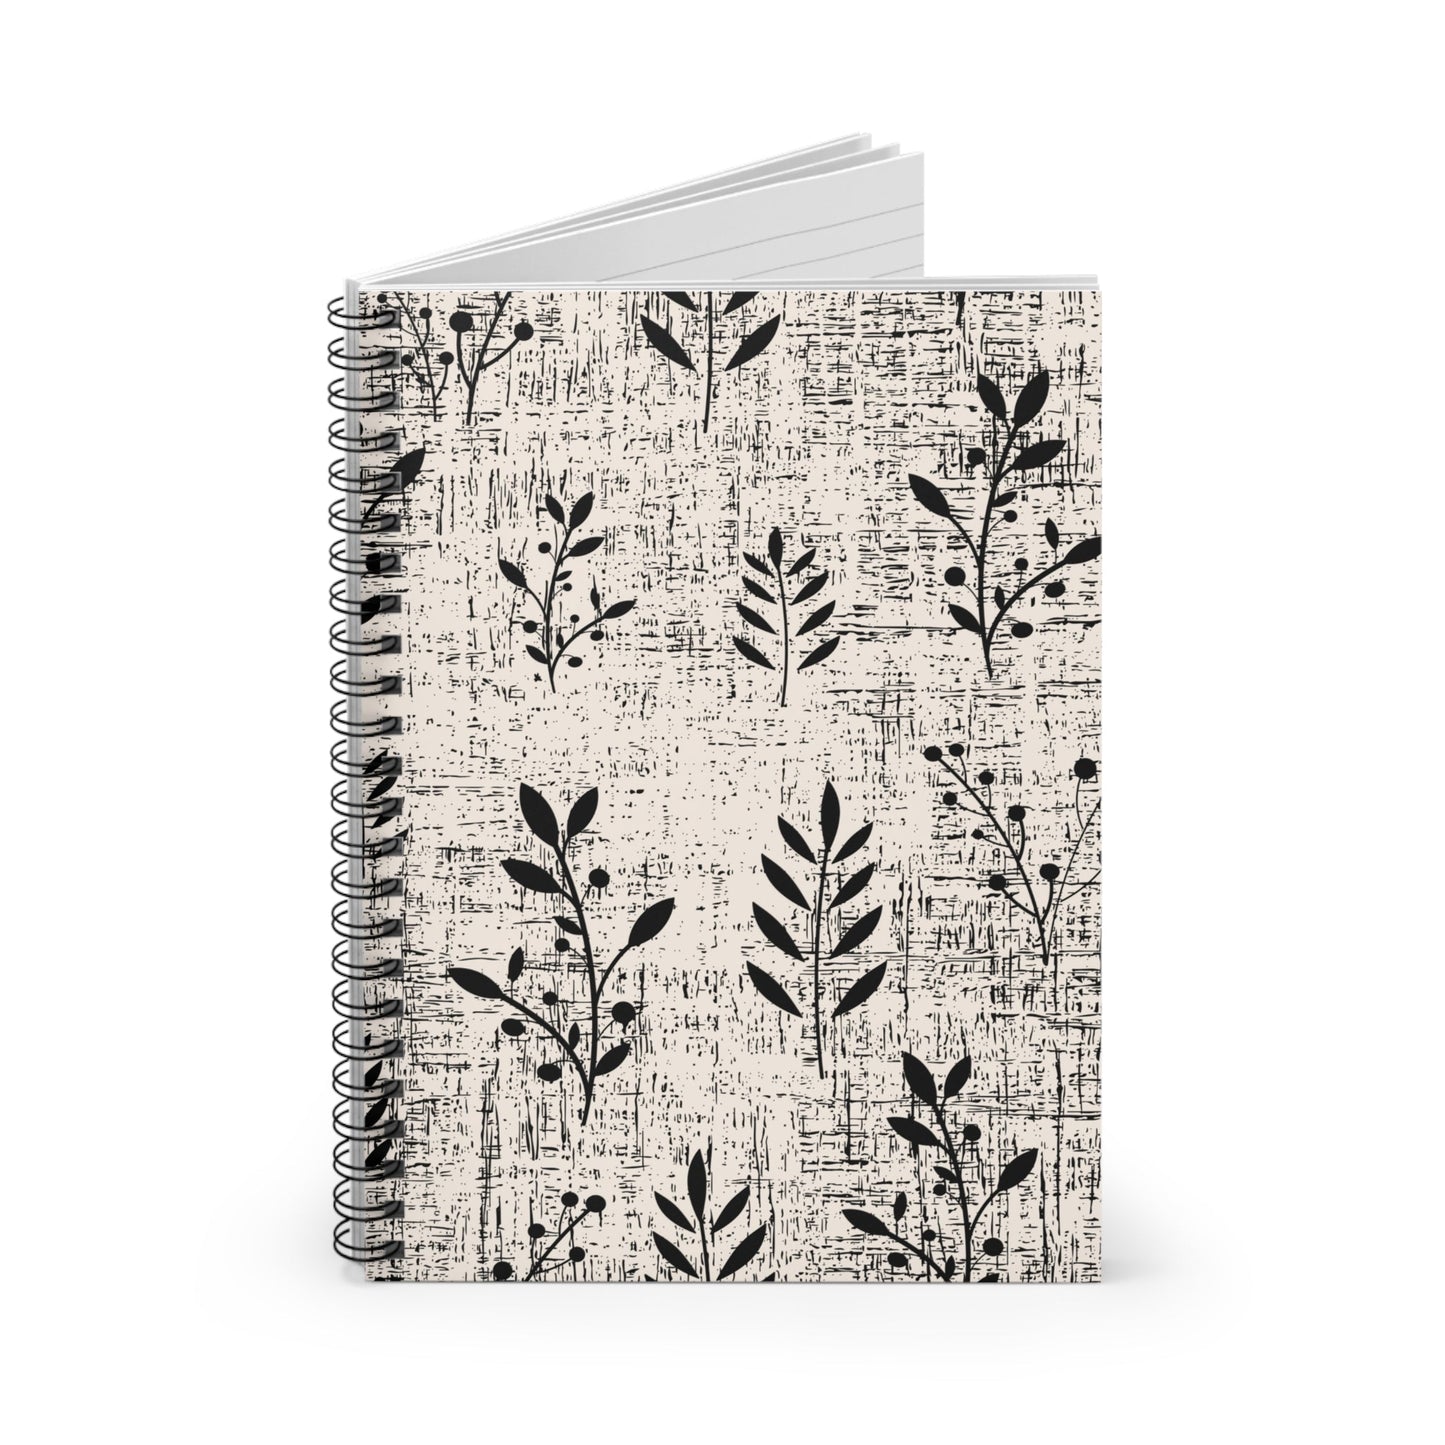 Monochrome Floral Pattern Spiral Notebook - Ruled Line: Elegant Black and White Design - Eddy and Rita